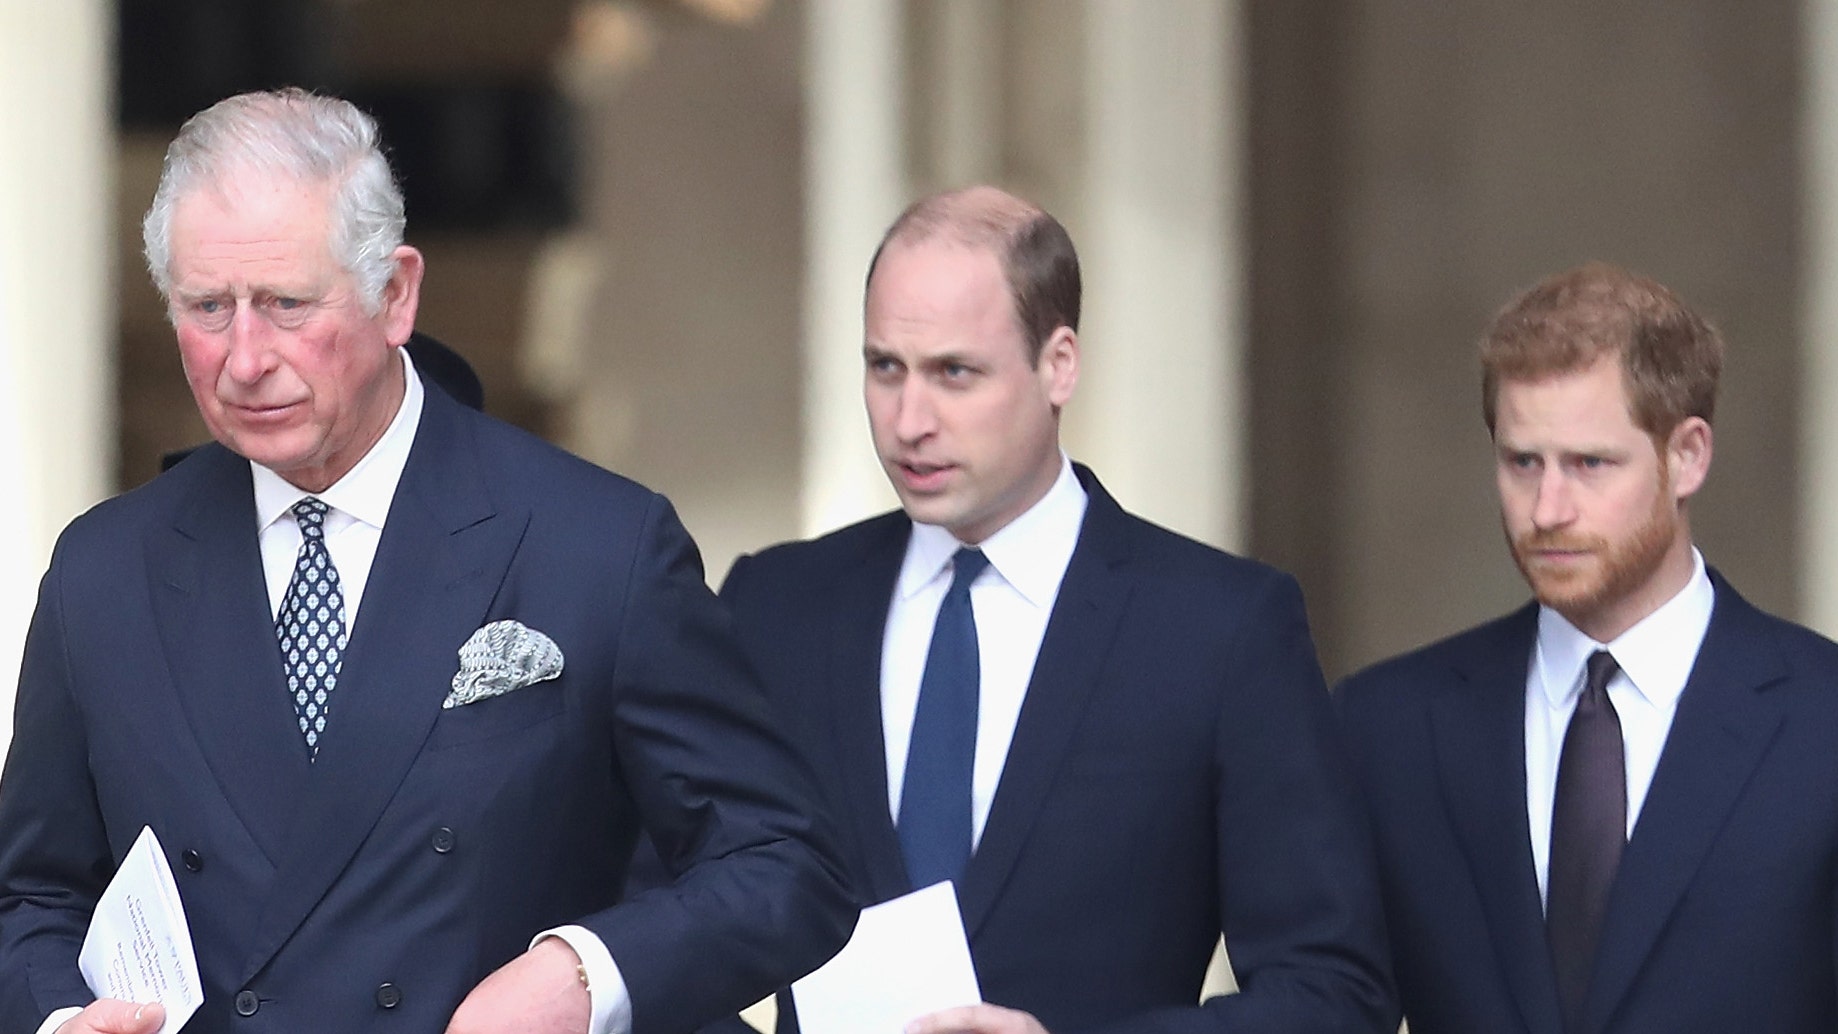 Prince Harry ‘sad’ over the split of the royal family, friend says: ‘Very hurt feelings’